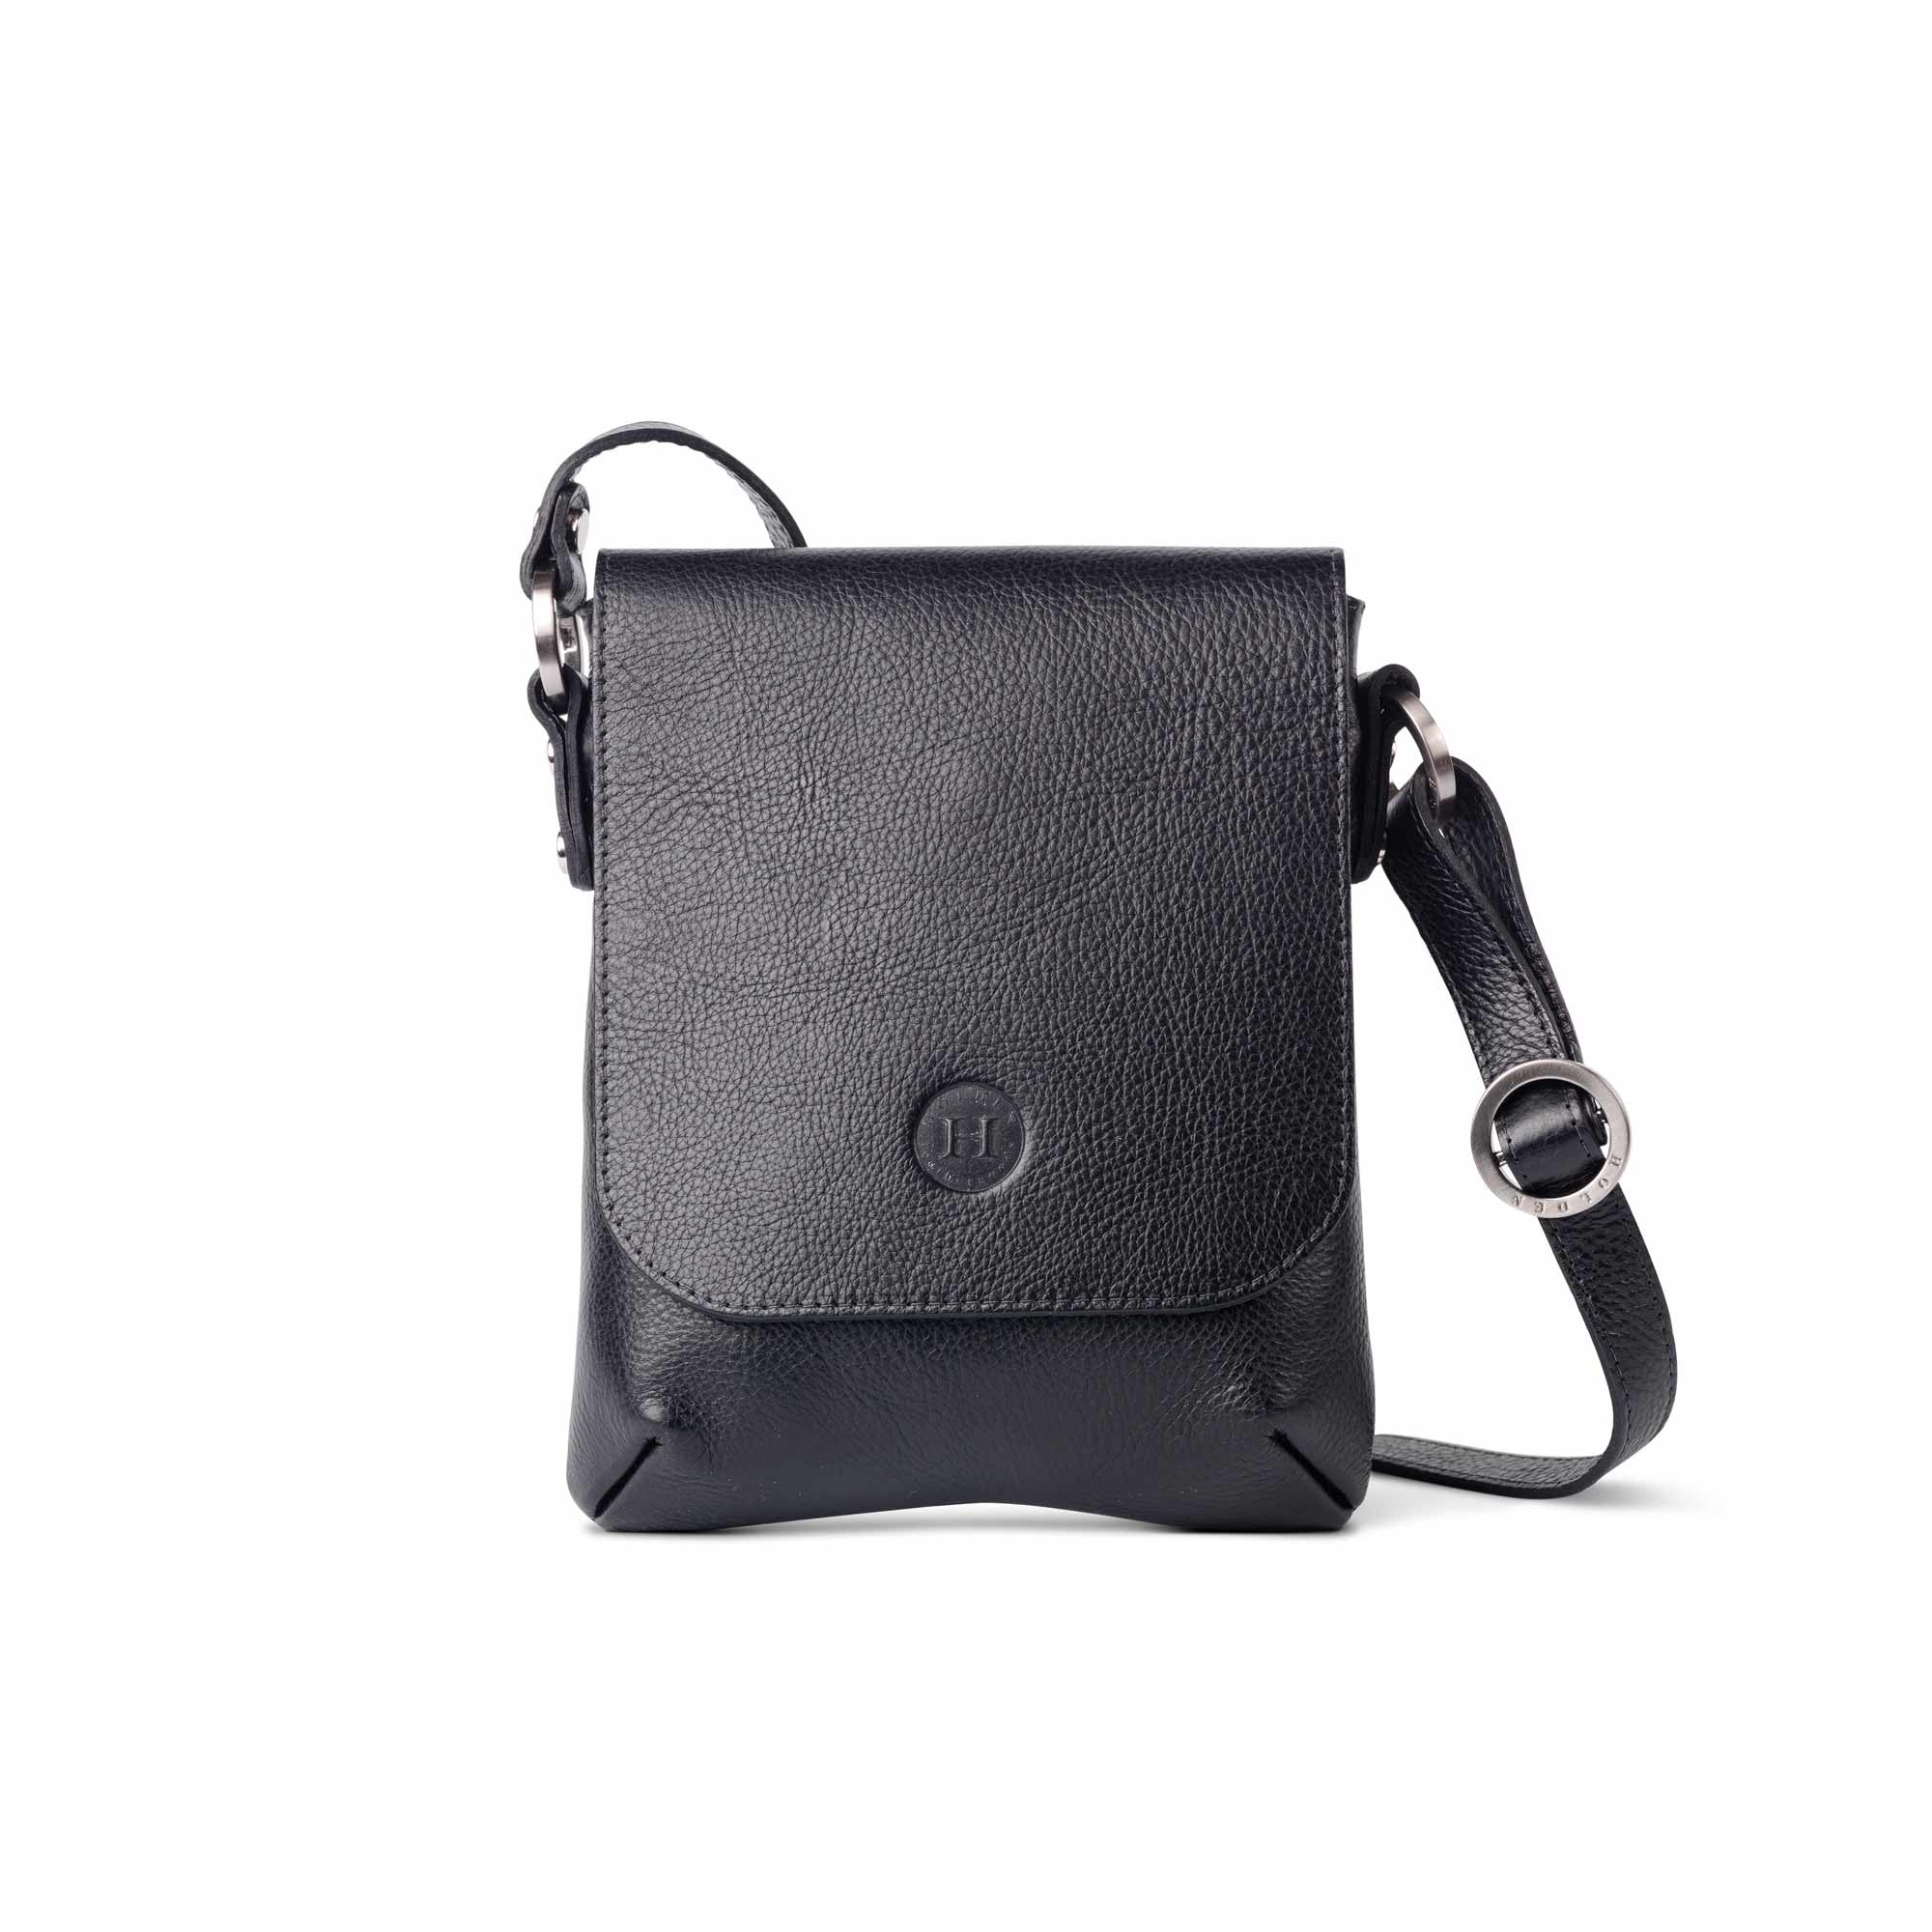 Eithne Medium Leather Crossover Bag Black - Holden Leathergoods, leather bags handmade in Ireland